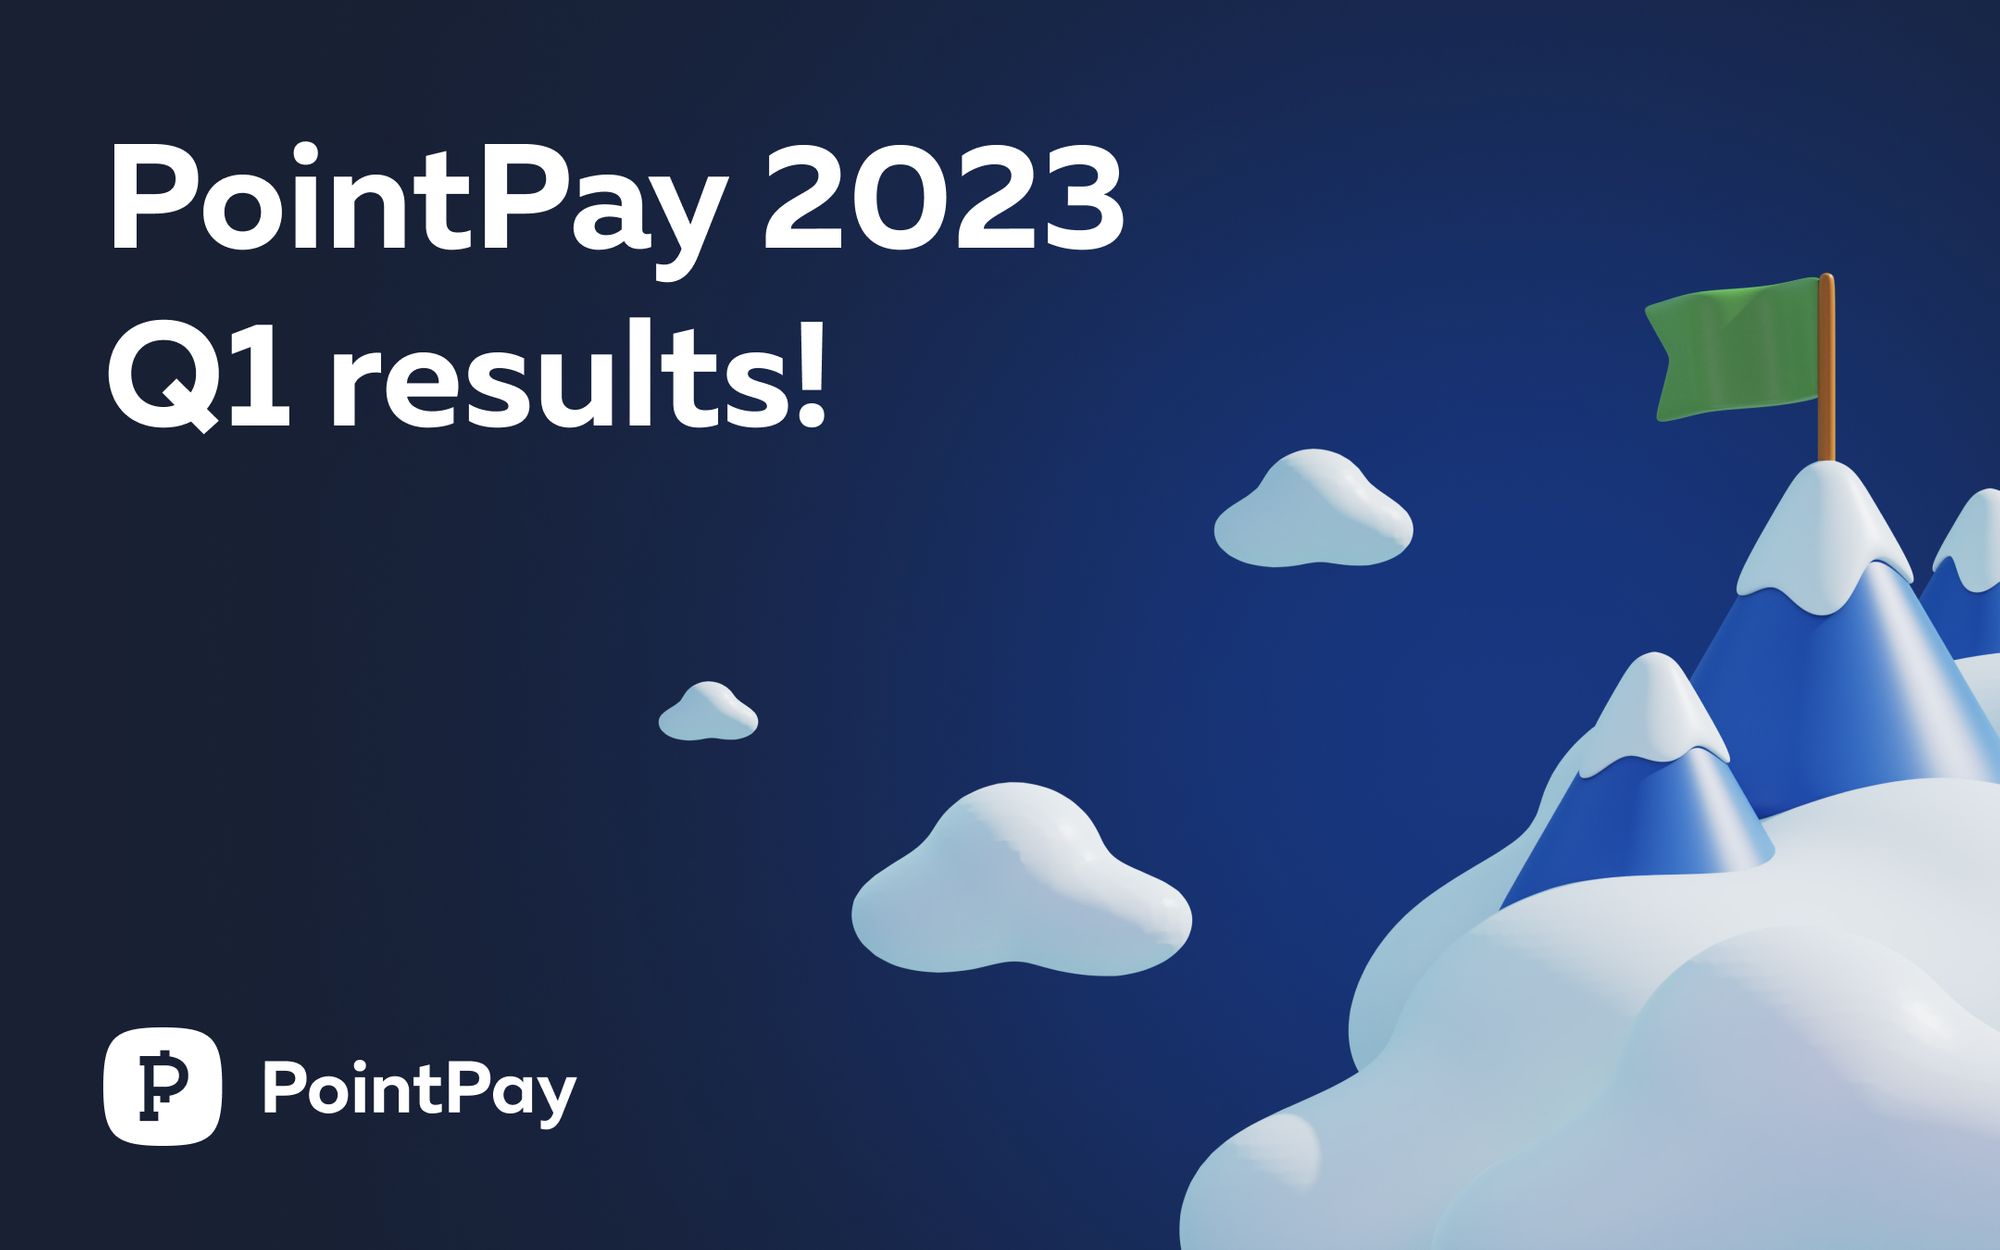 PointPay 2023 Q1 results overview